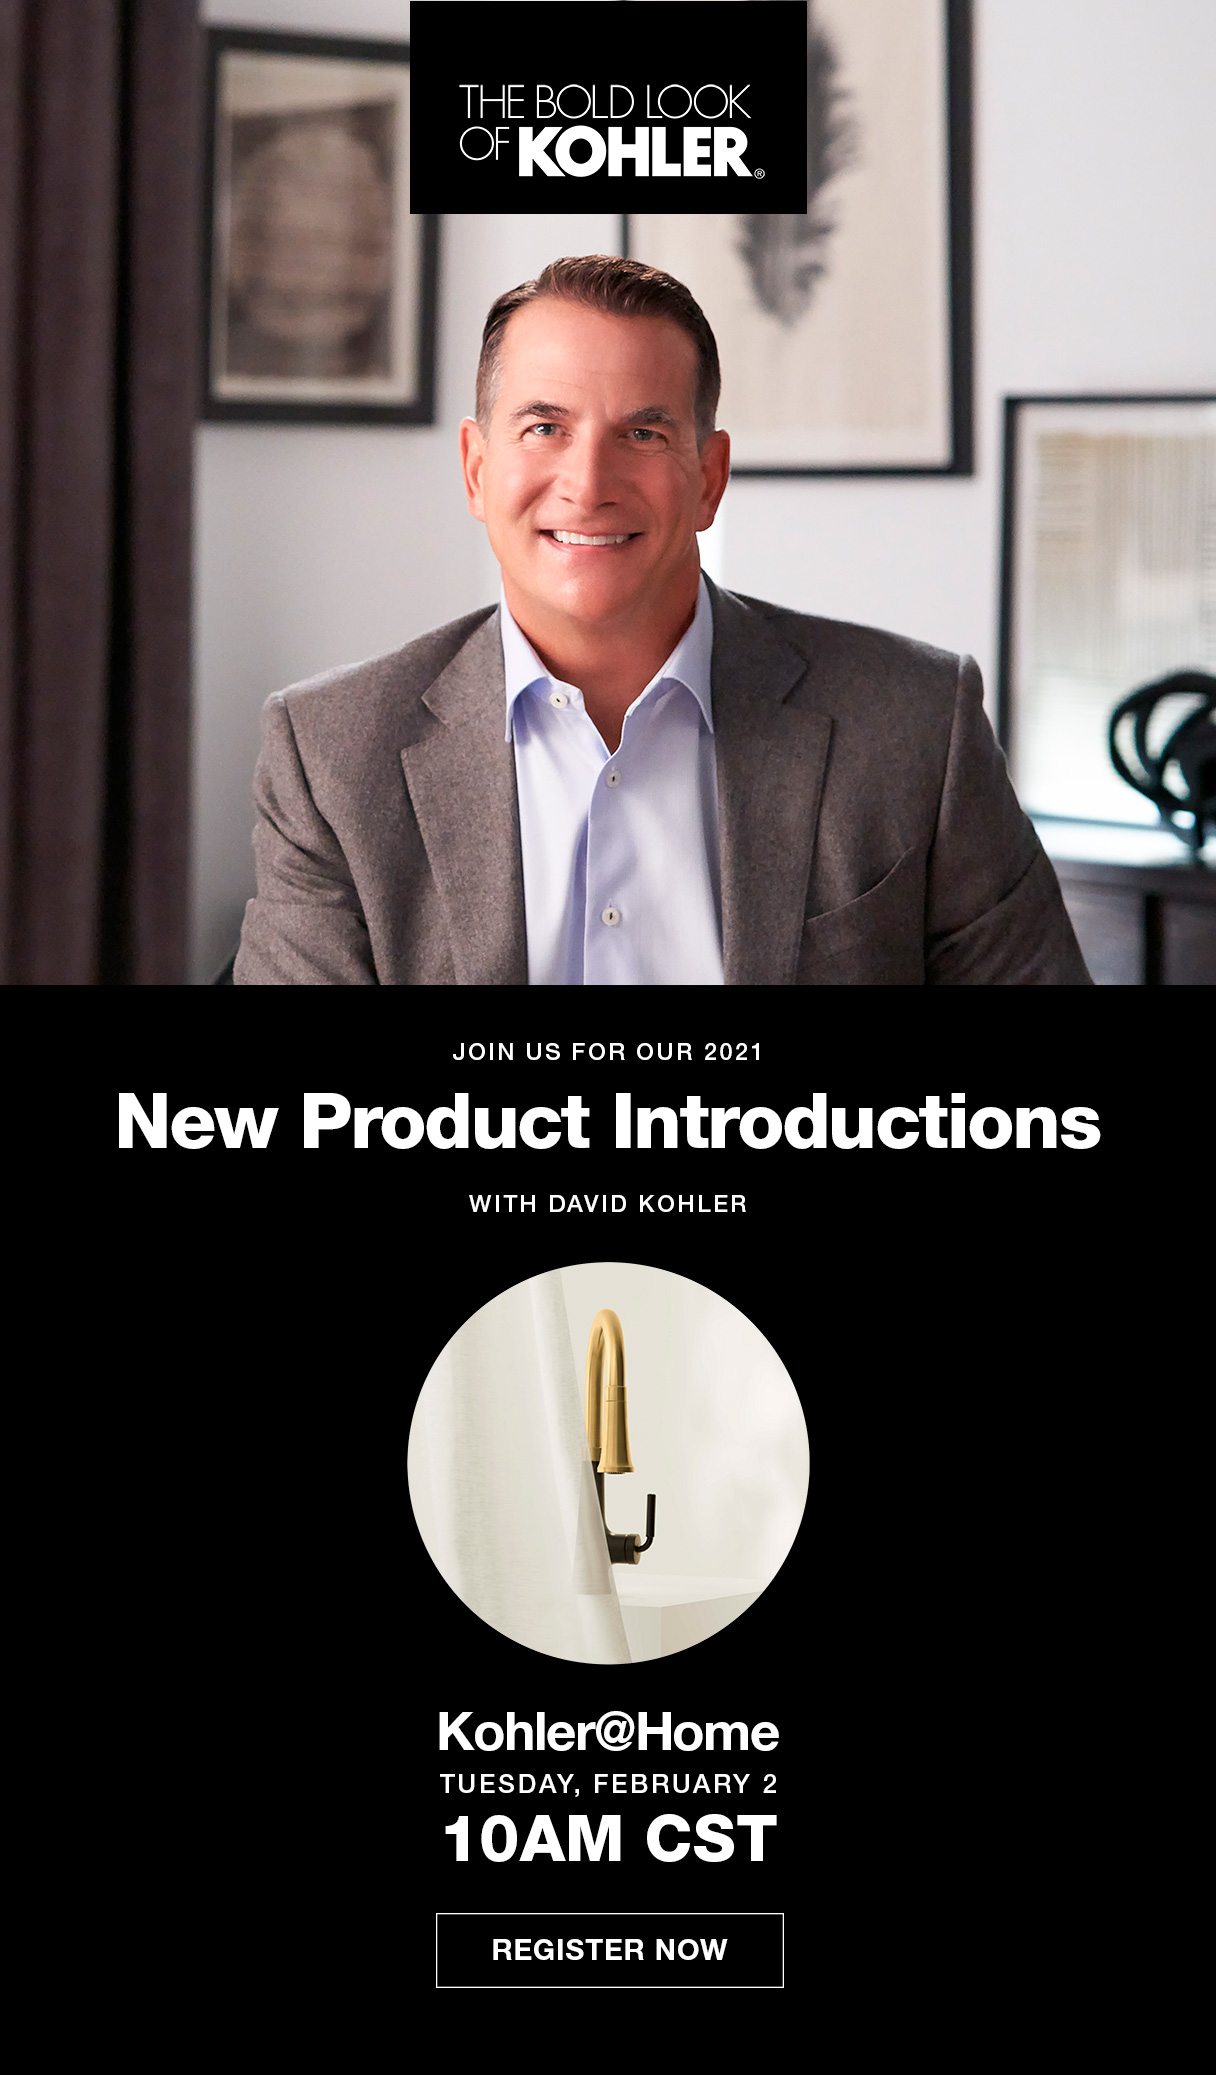 NEW PRODUCT INTRODUCTIONS